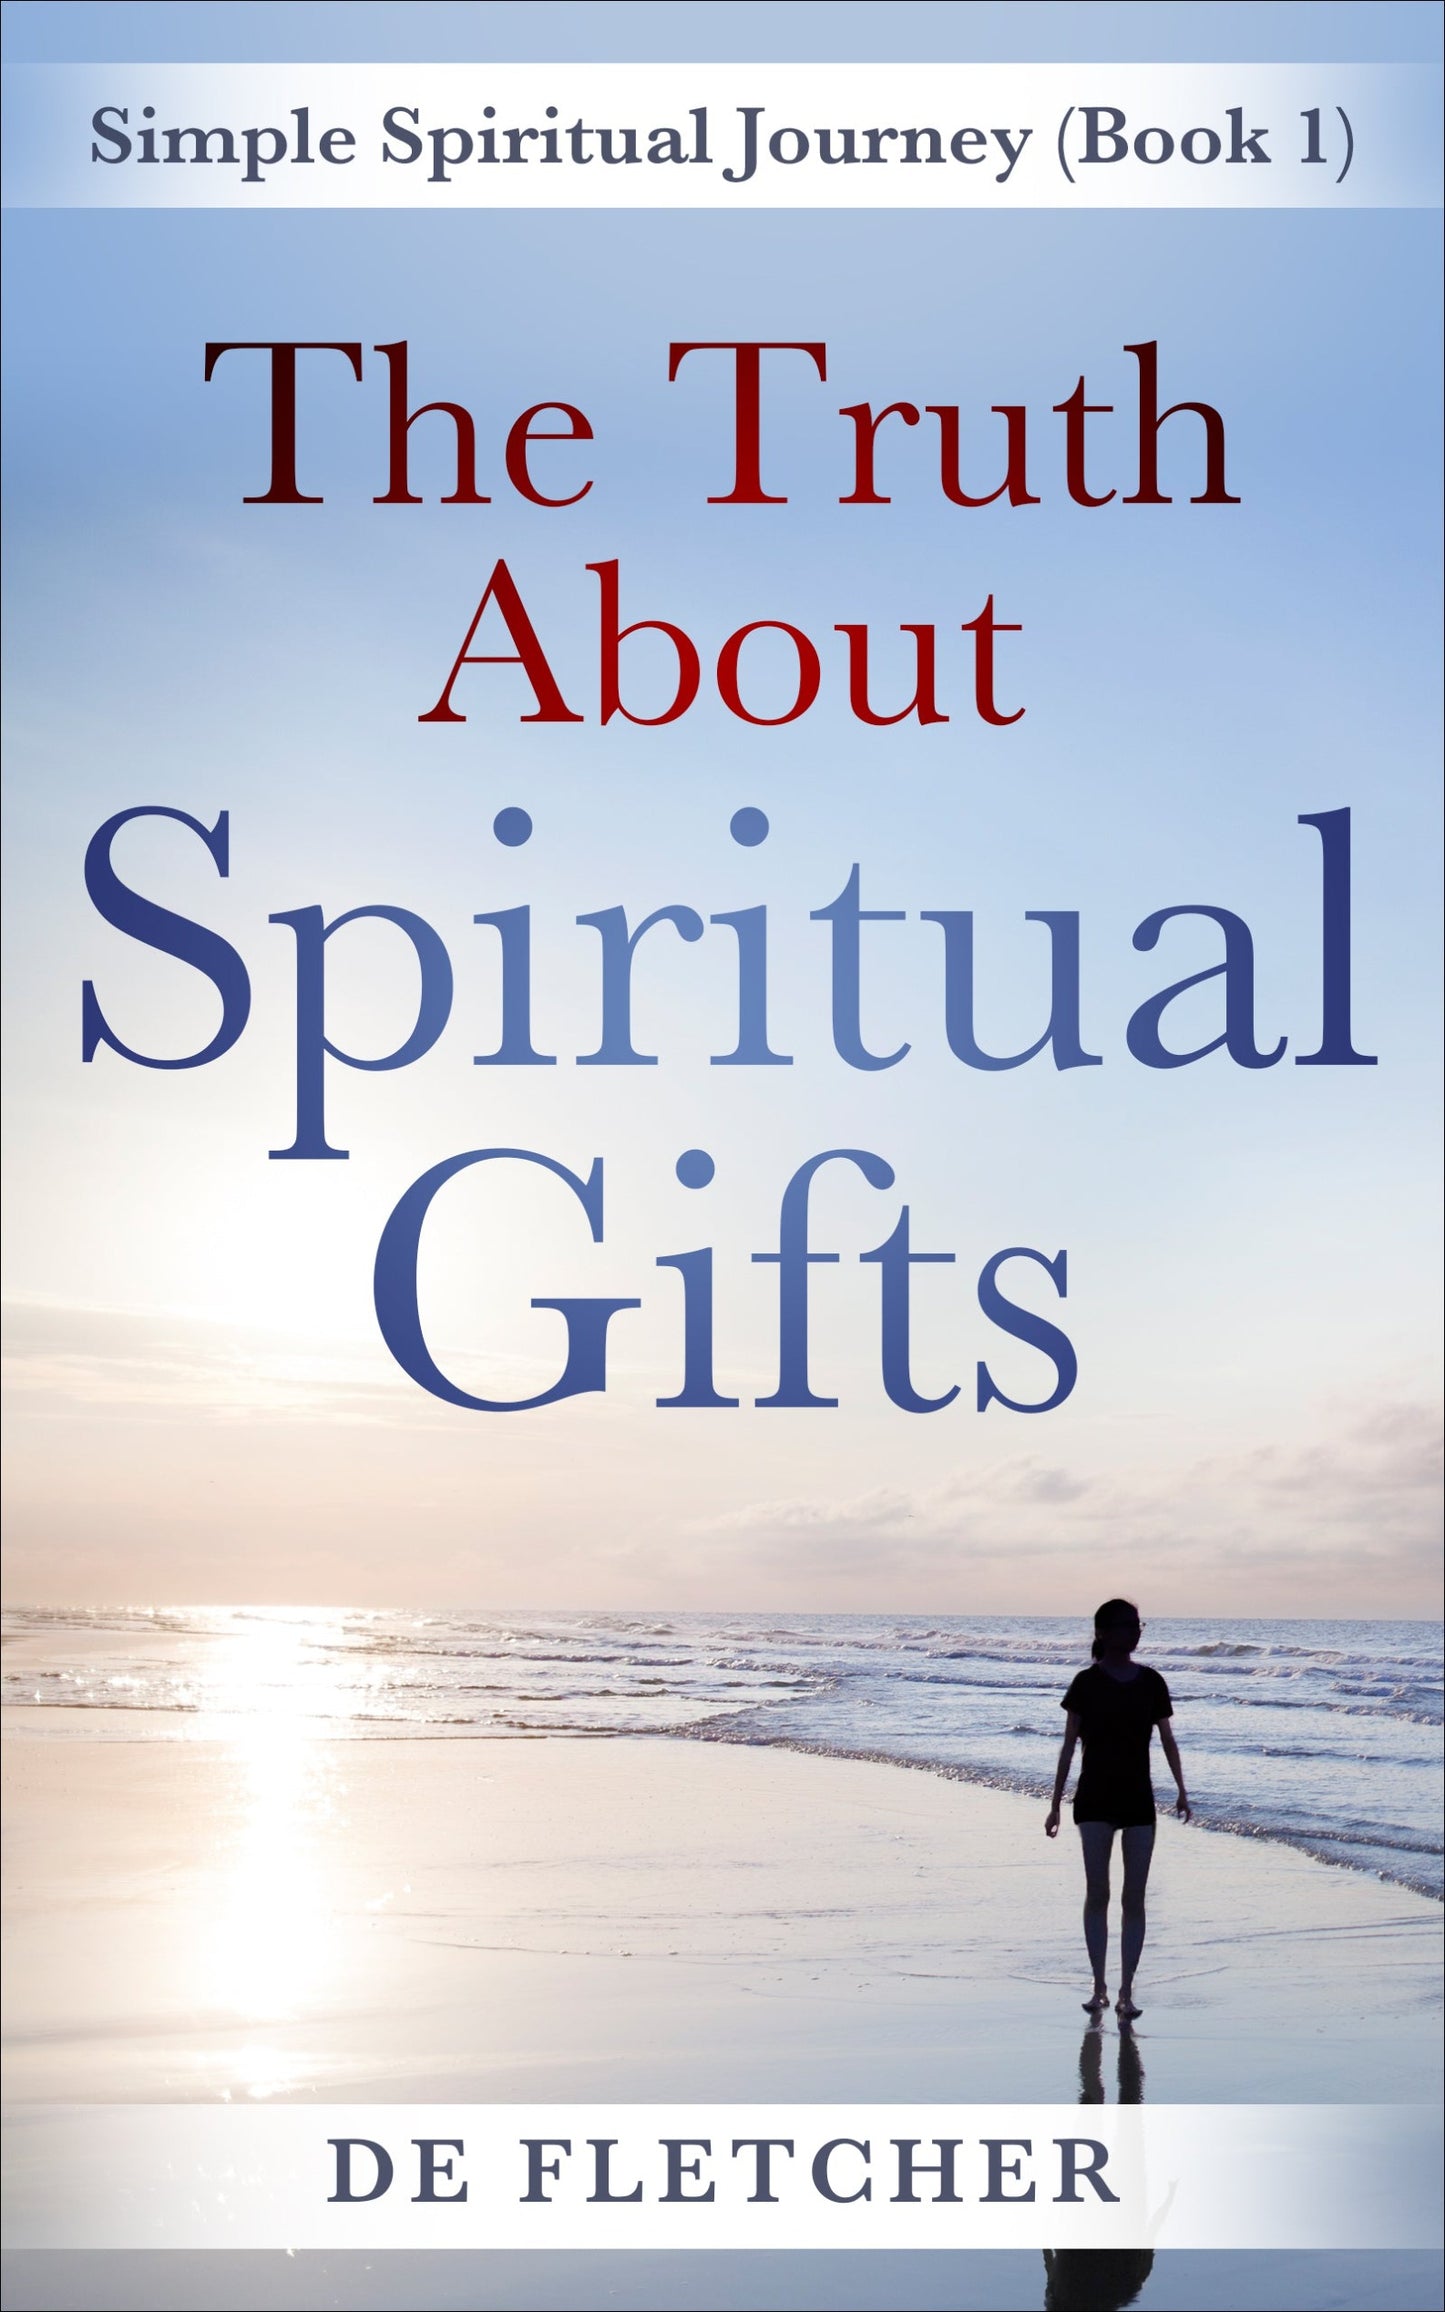 The cover image of "The Truth About Spiritual Gifts" shows a woman walking along the beach at sunset.